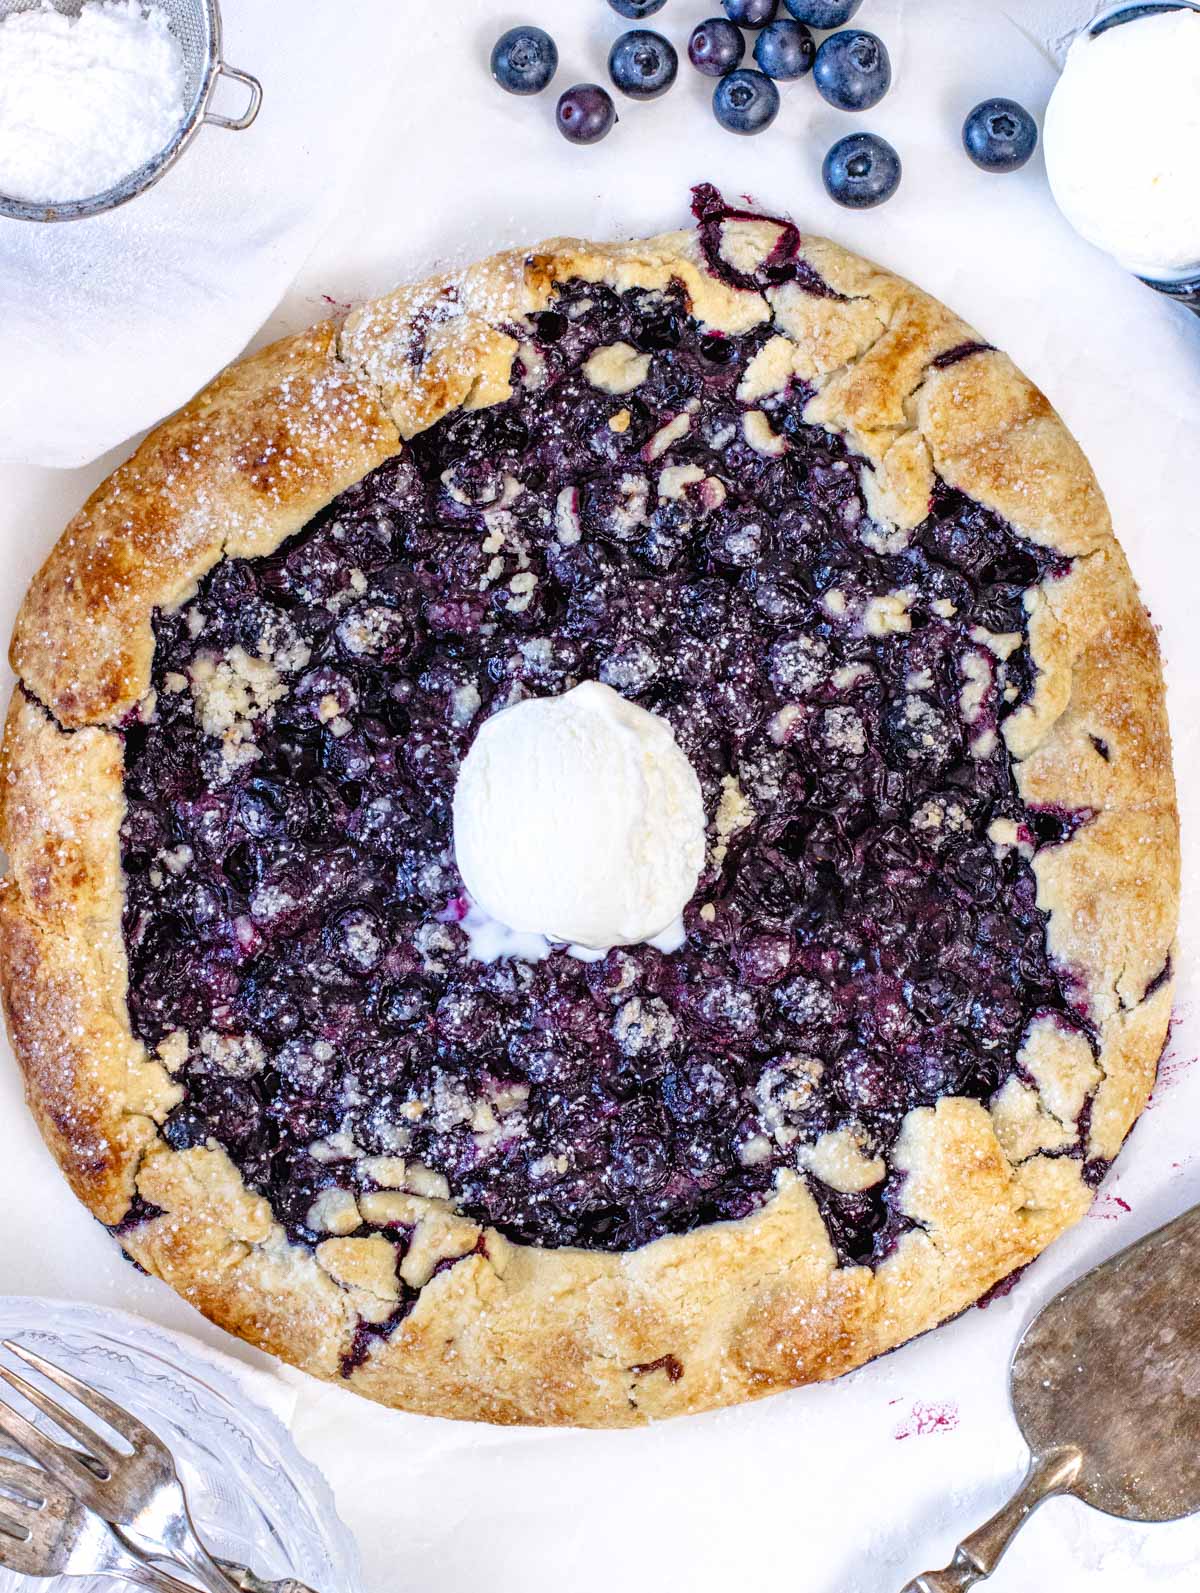 Blueberry galette with fresh blueberries